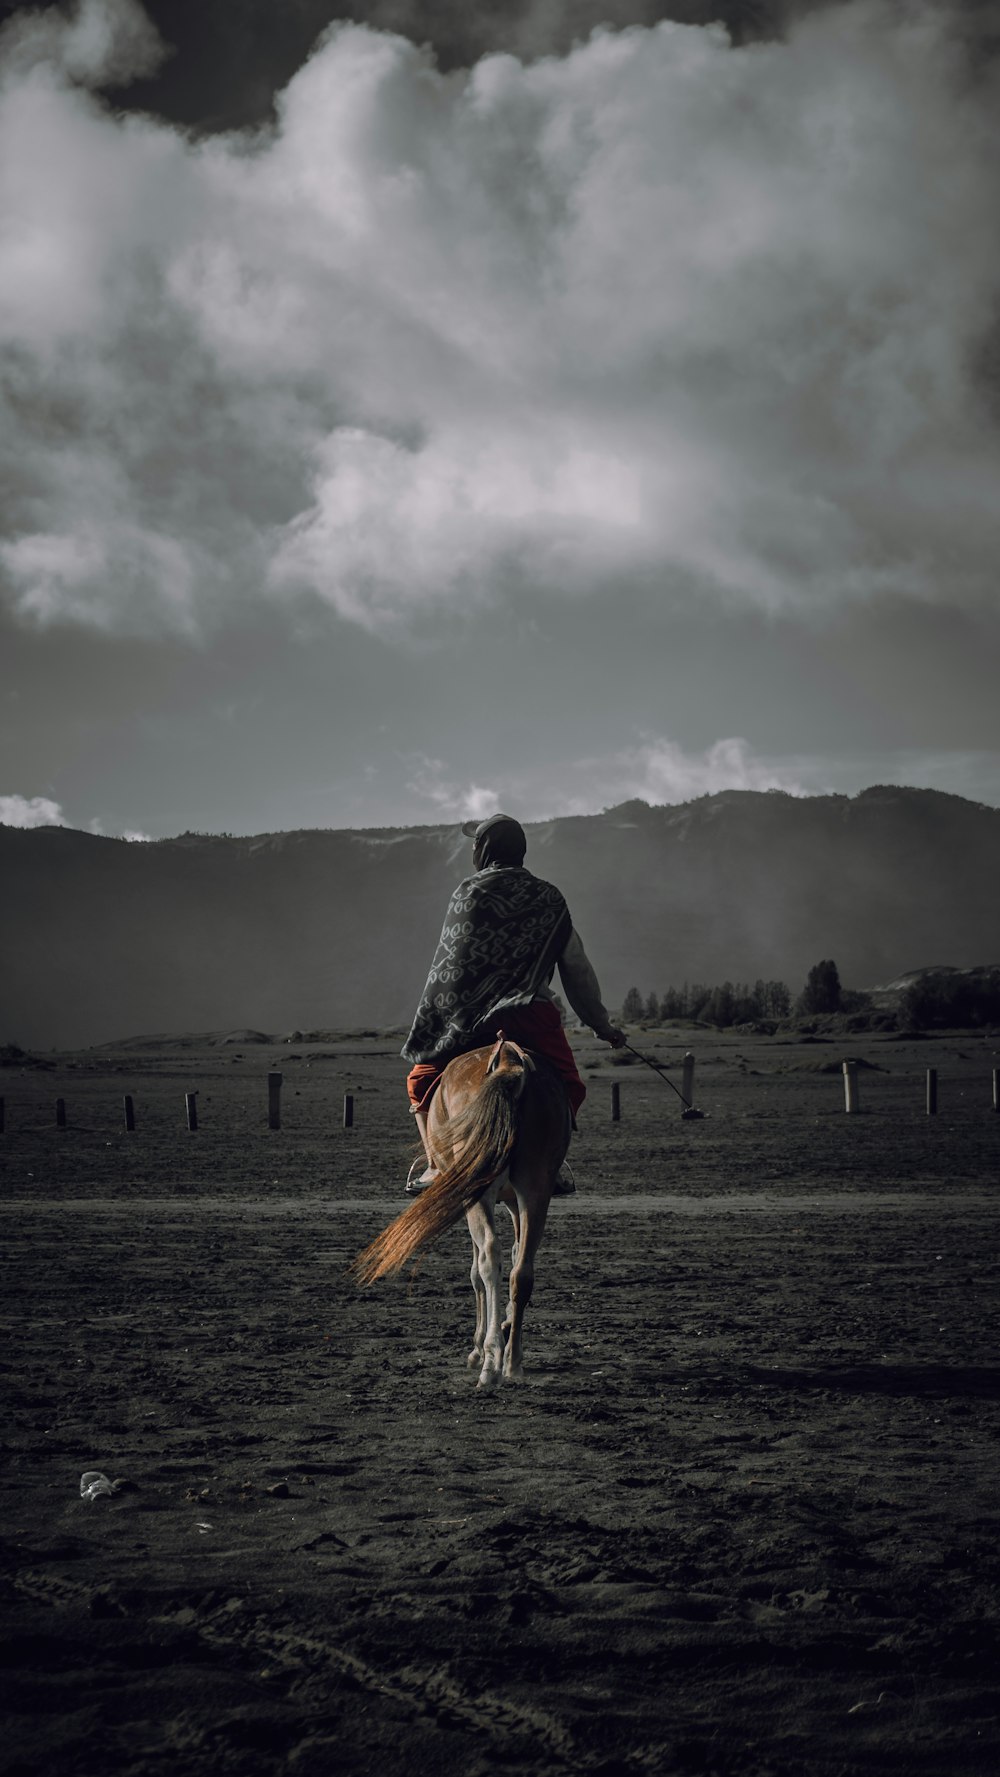 man riding brown horse on green grass field under cloudy sky during daytime